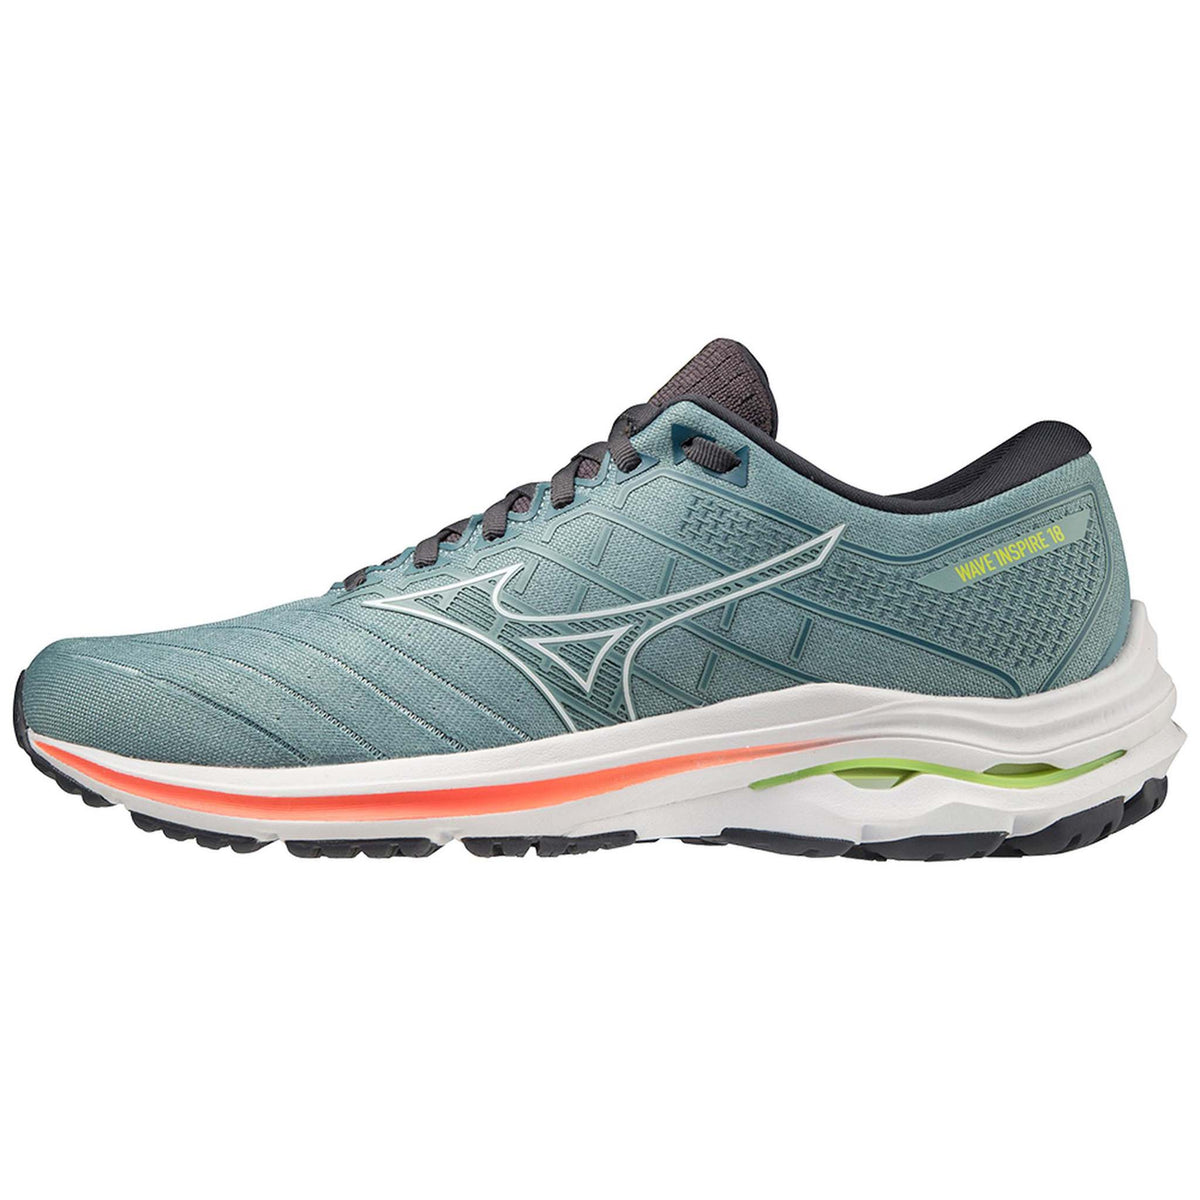 Mizuno Wave Inspire 18 running homme smoke blue white lateral